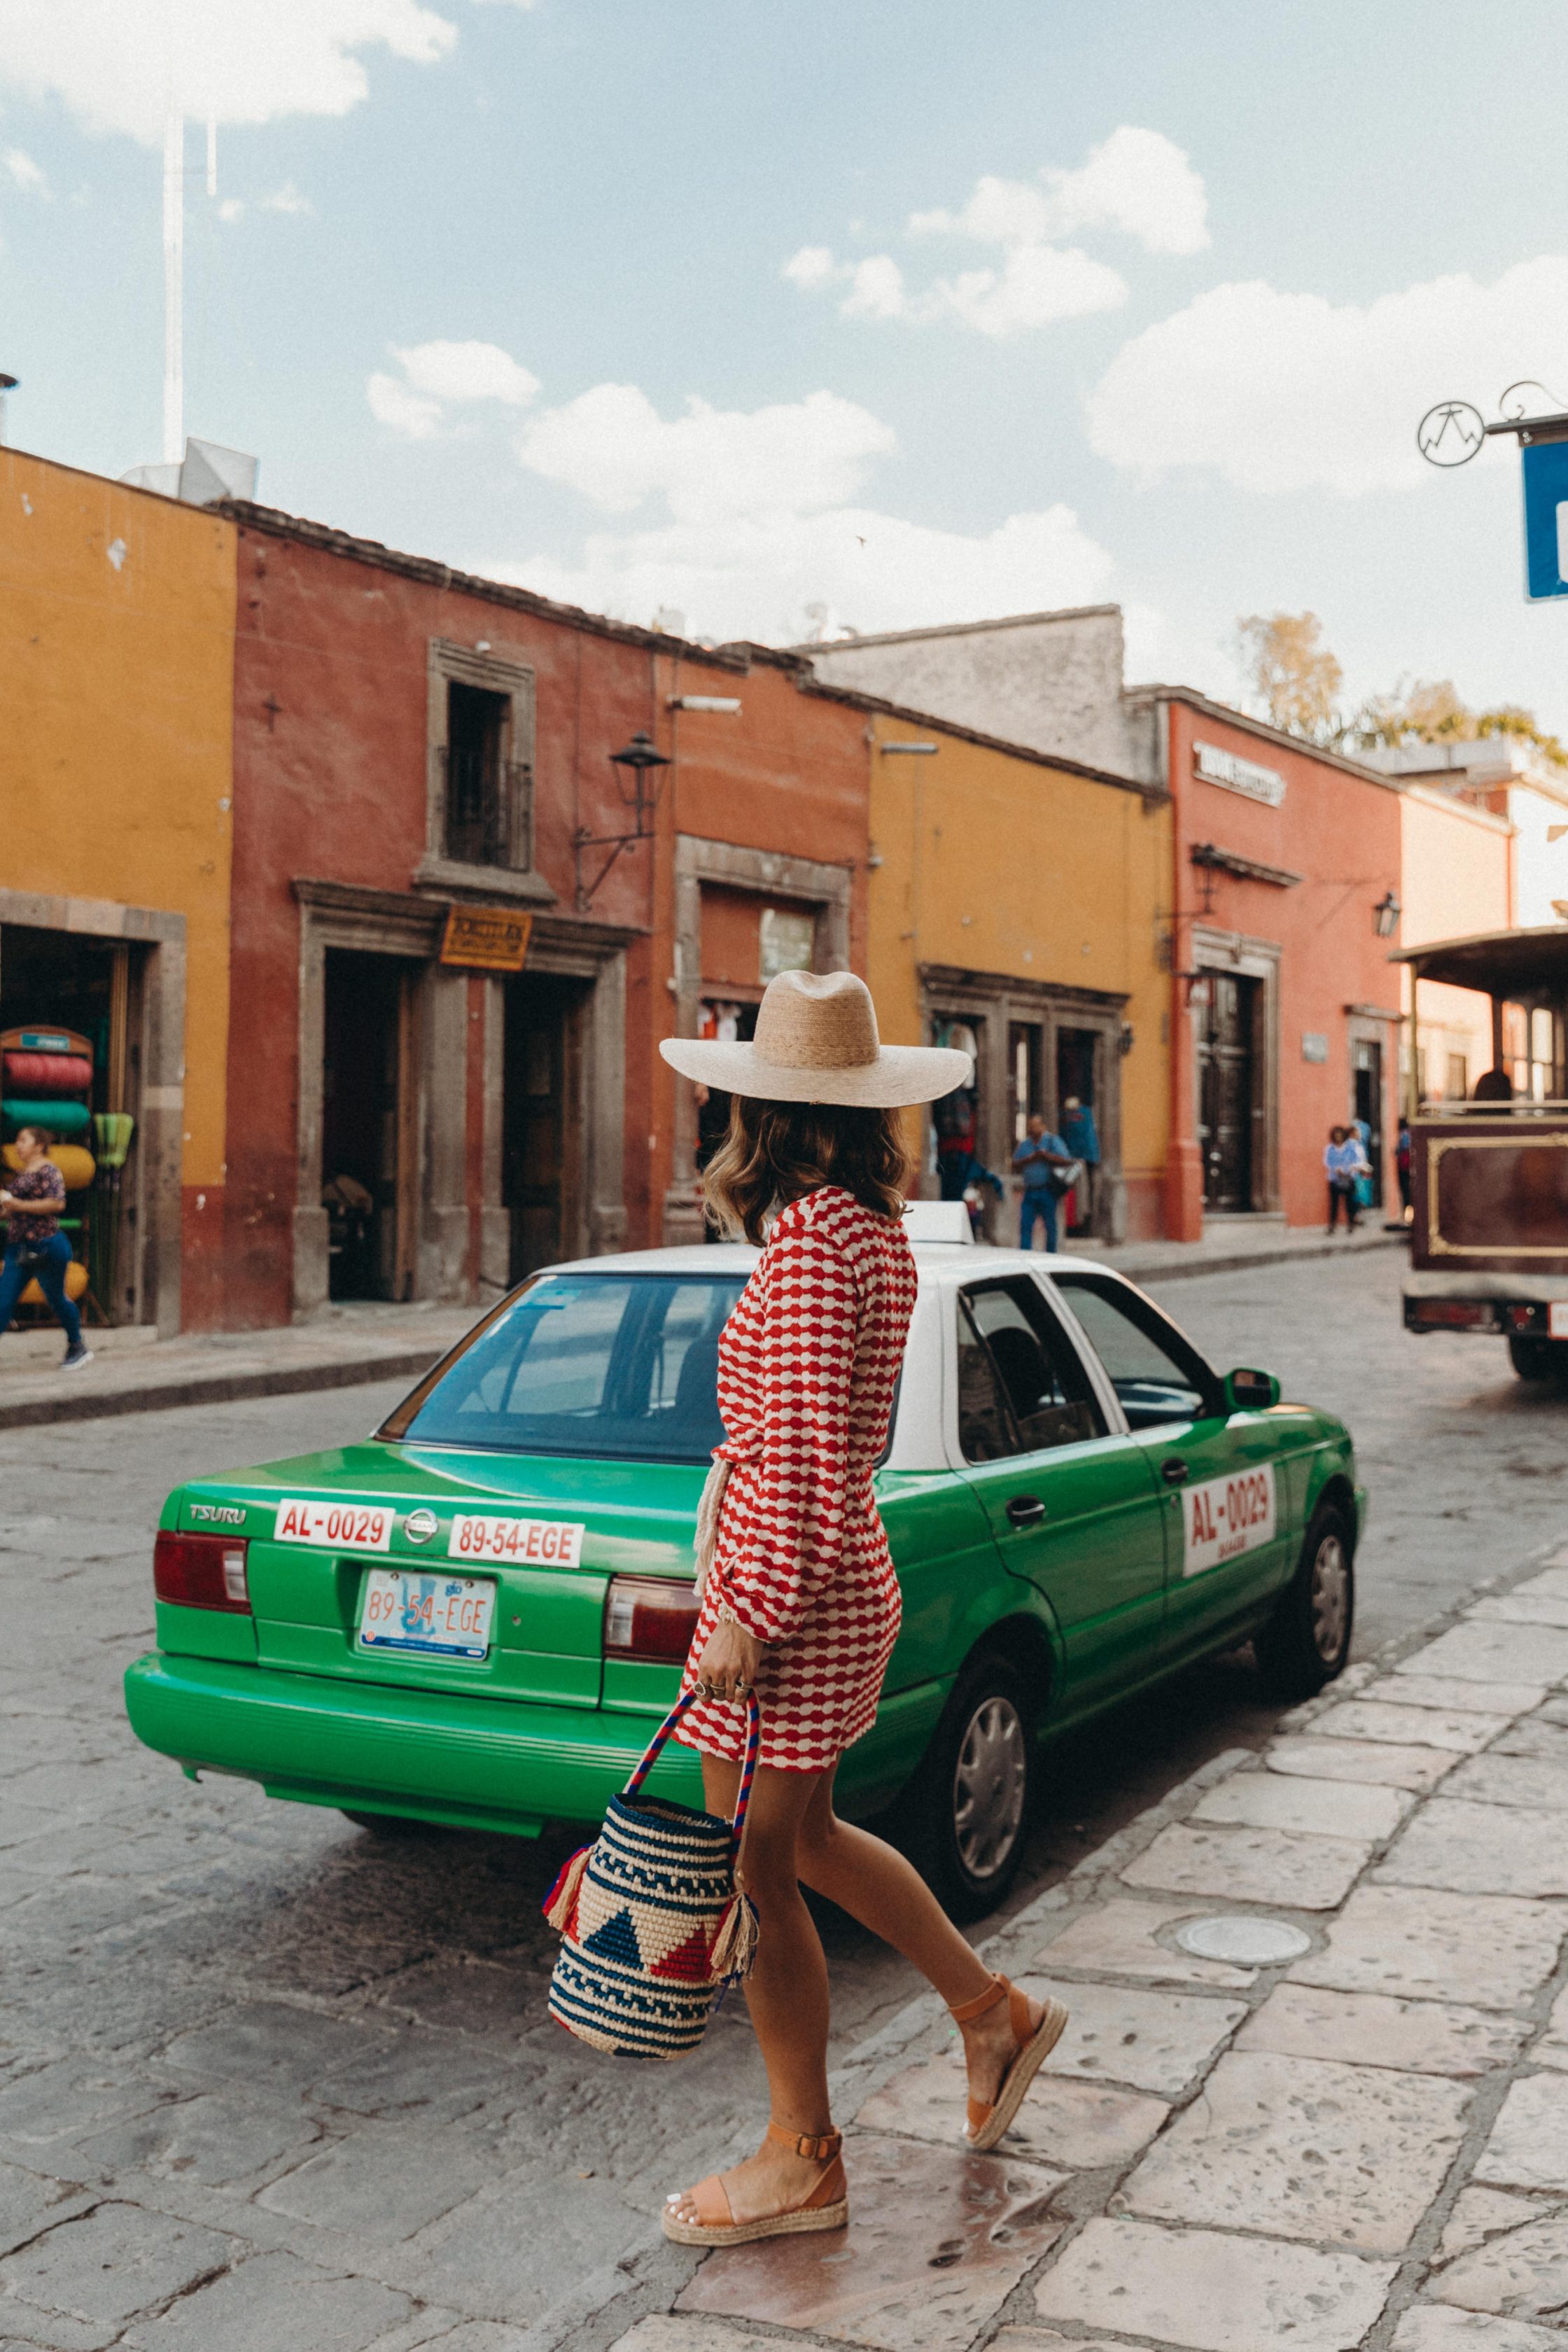 Sara of Collage Vintage wearing a red dress from Zara and leather espadrilles at San Miguel de Allende